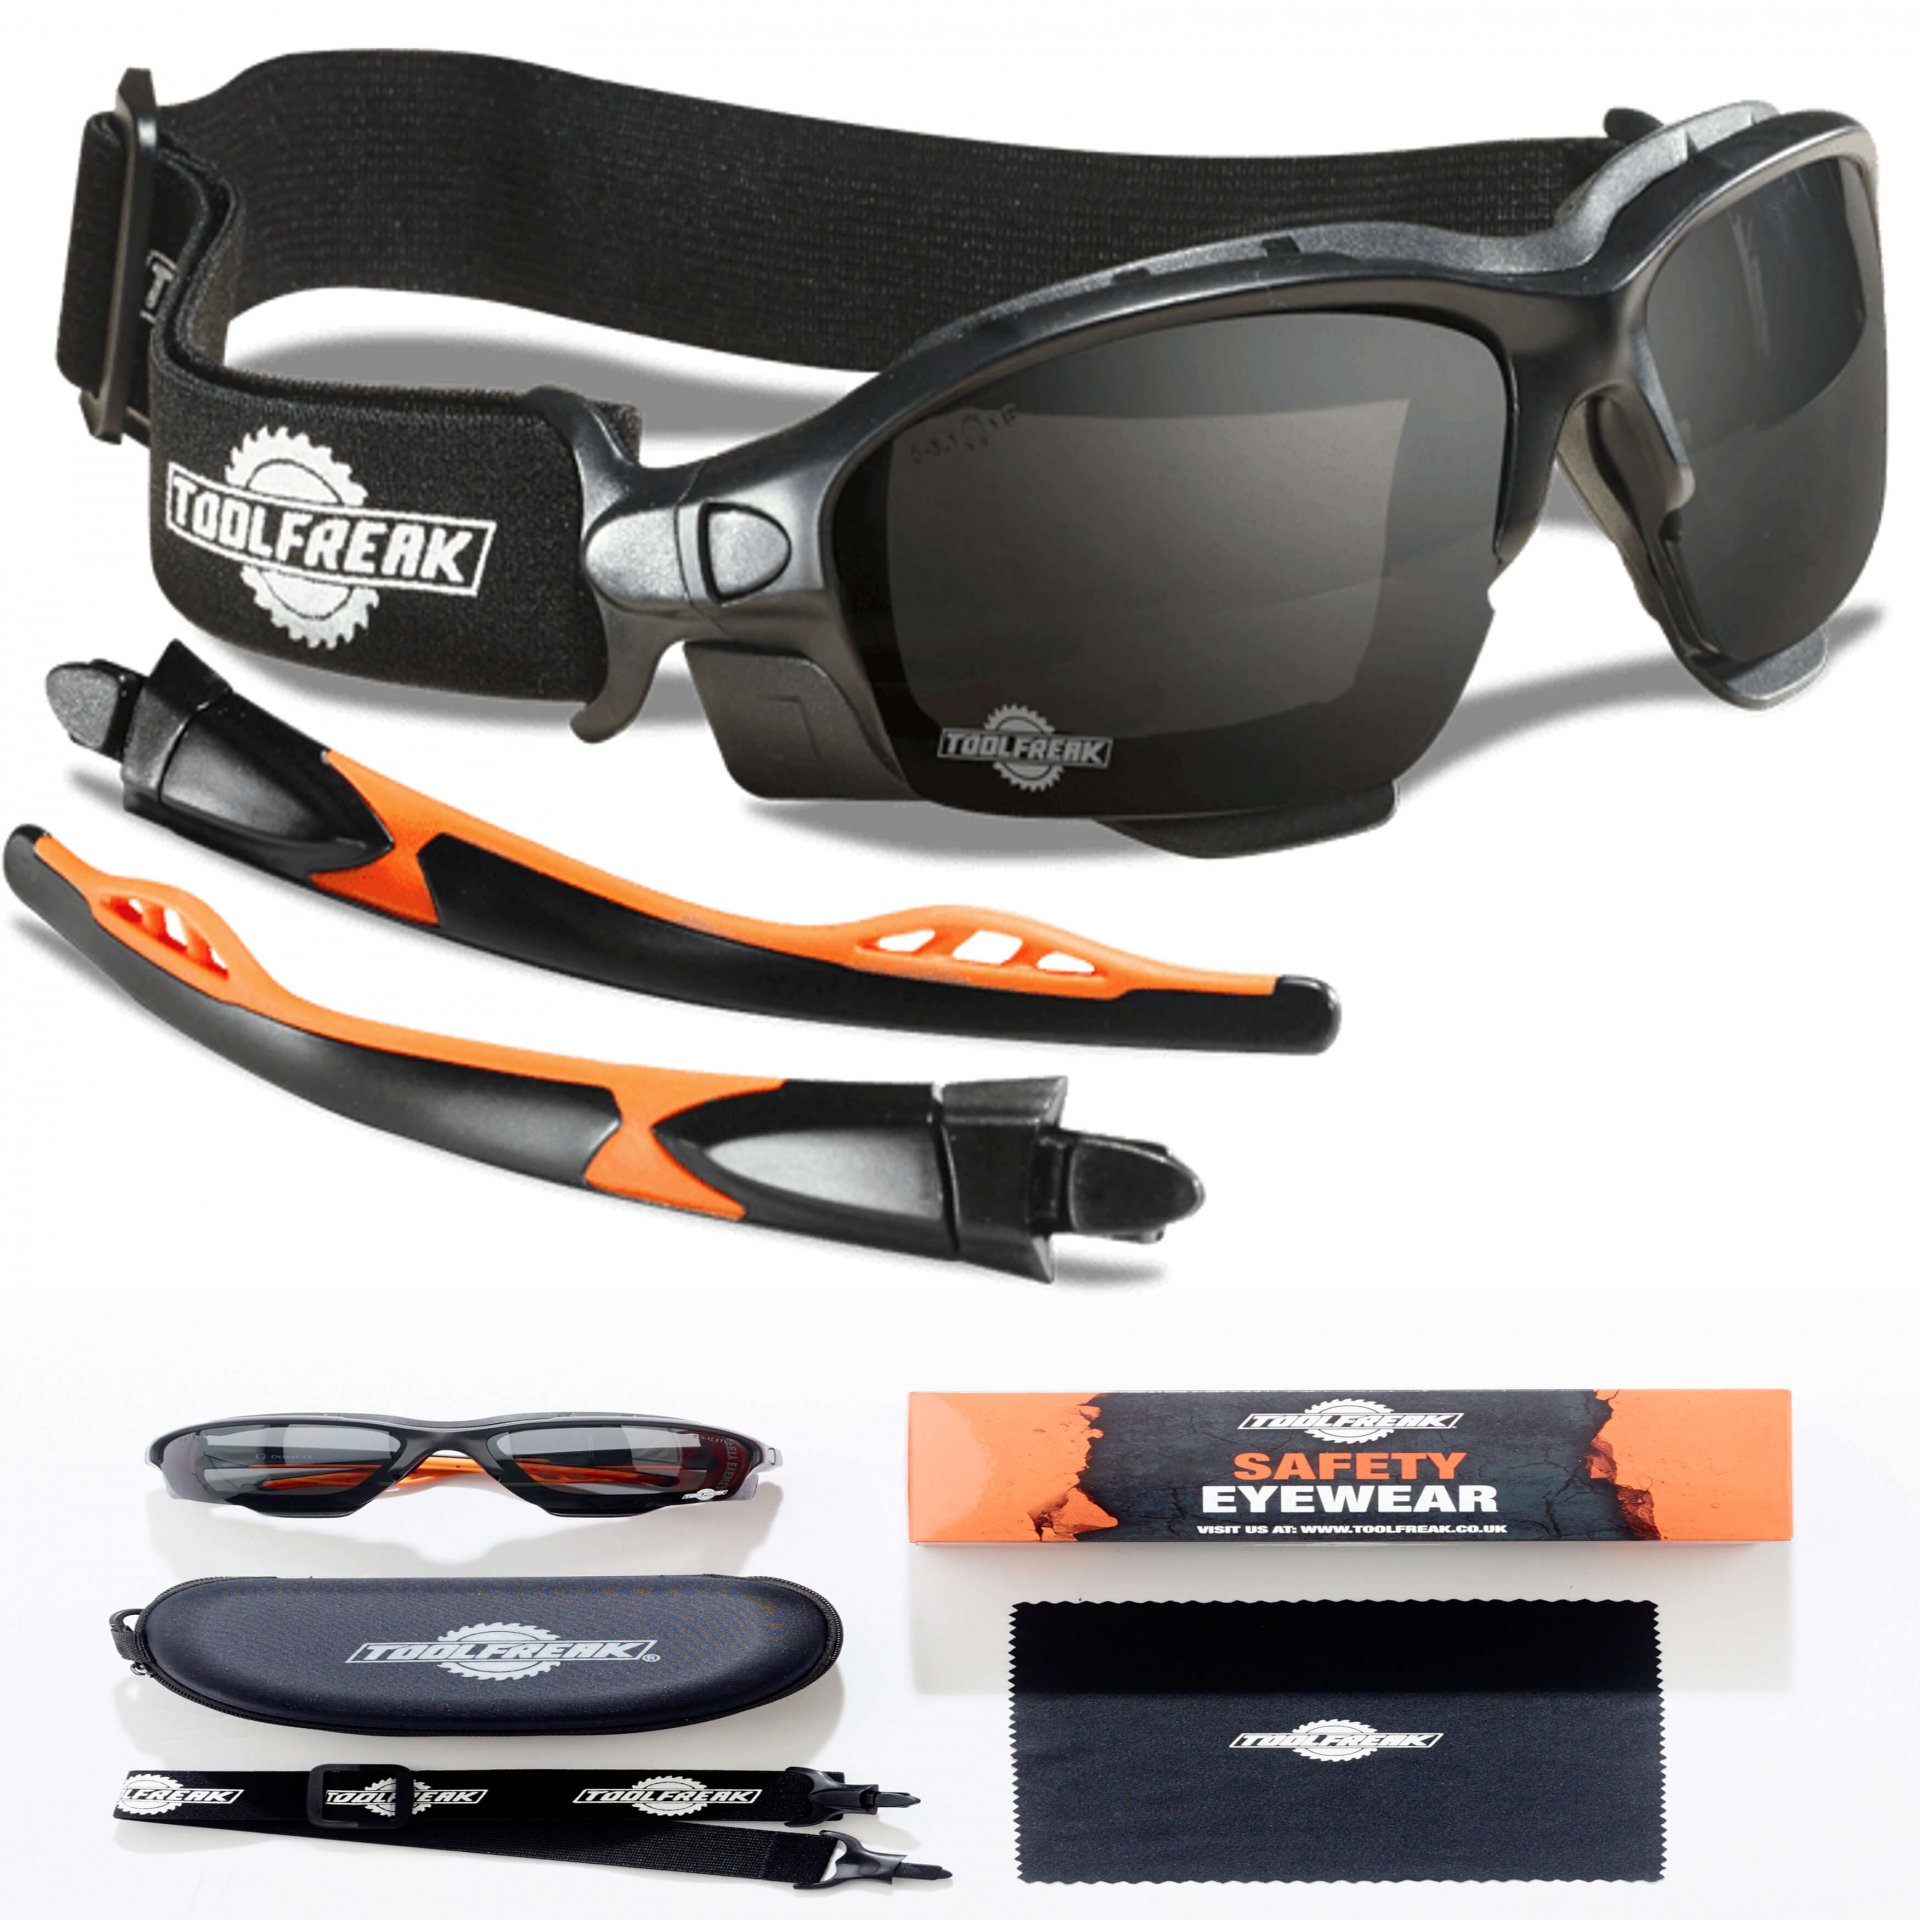 Special Features of the Best Mtb Eyewear to Benefit Mountain Bikers  https://toolfreak.com/collections/all  -
Today, a large number of young boys and girls opt to experience mountain biking activities.  by spikerurutherford